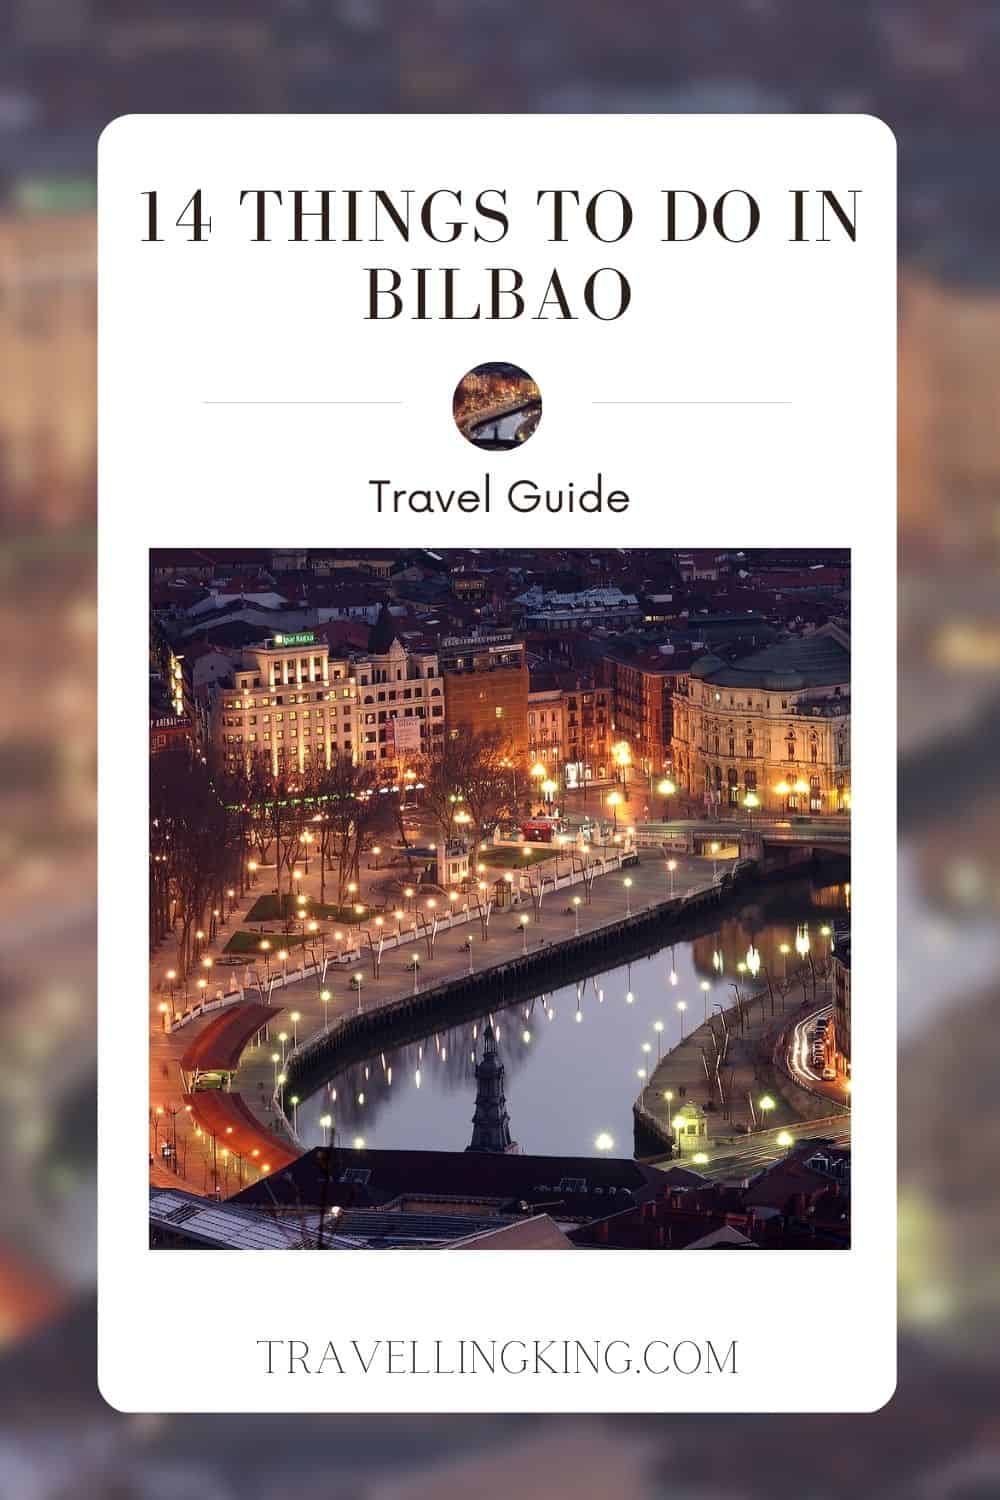 14 Things to do in Bilbao